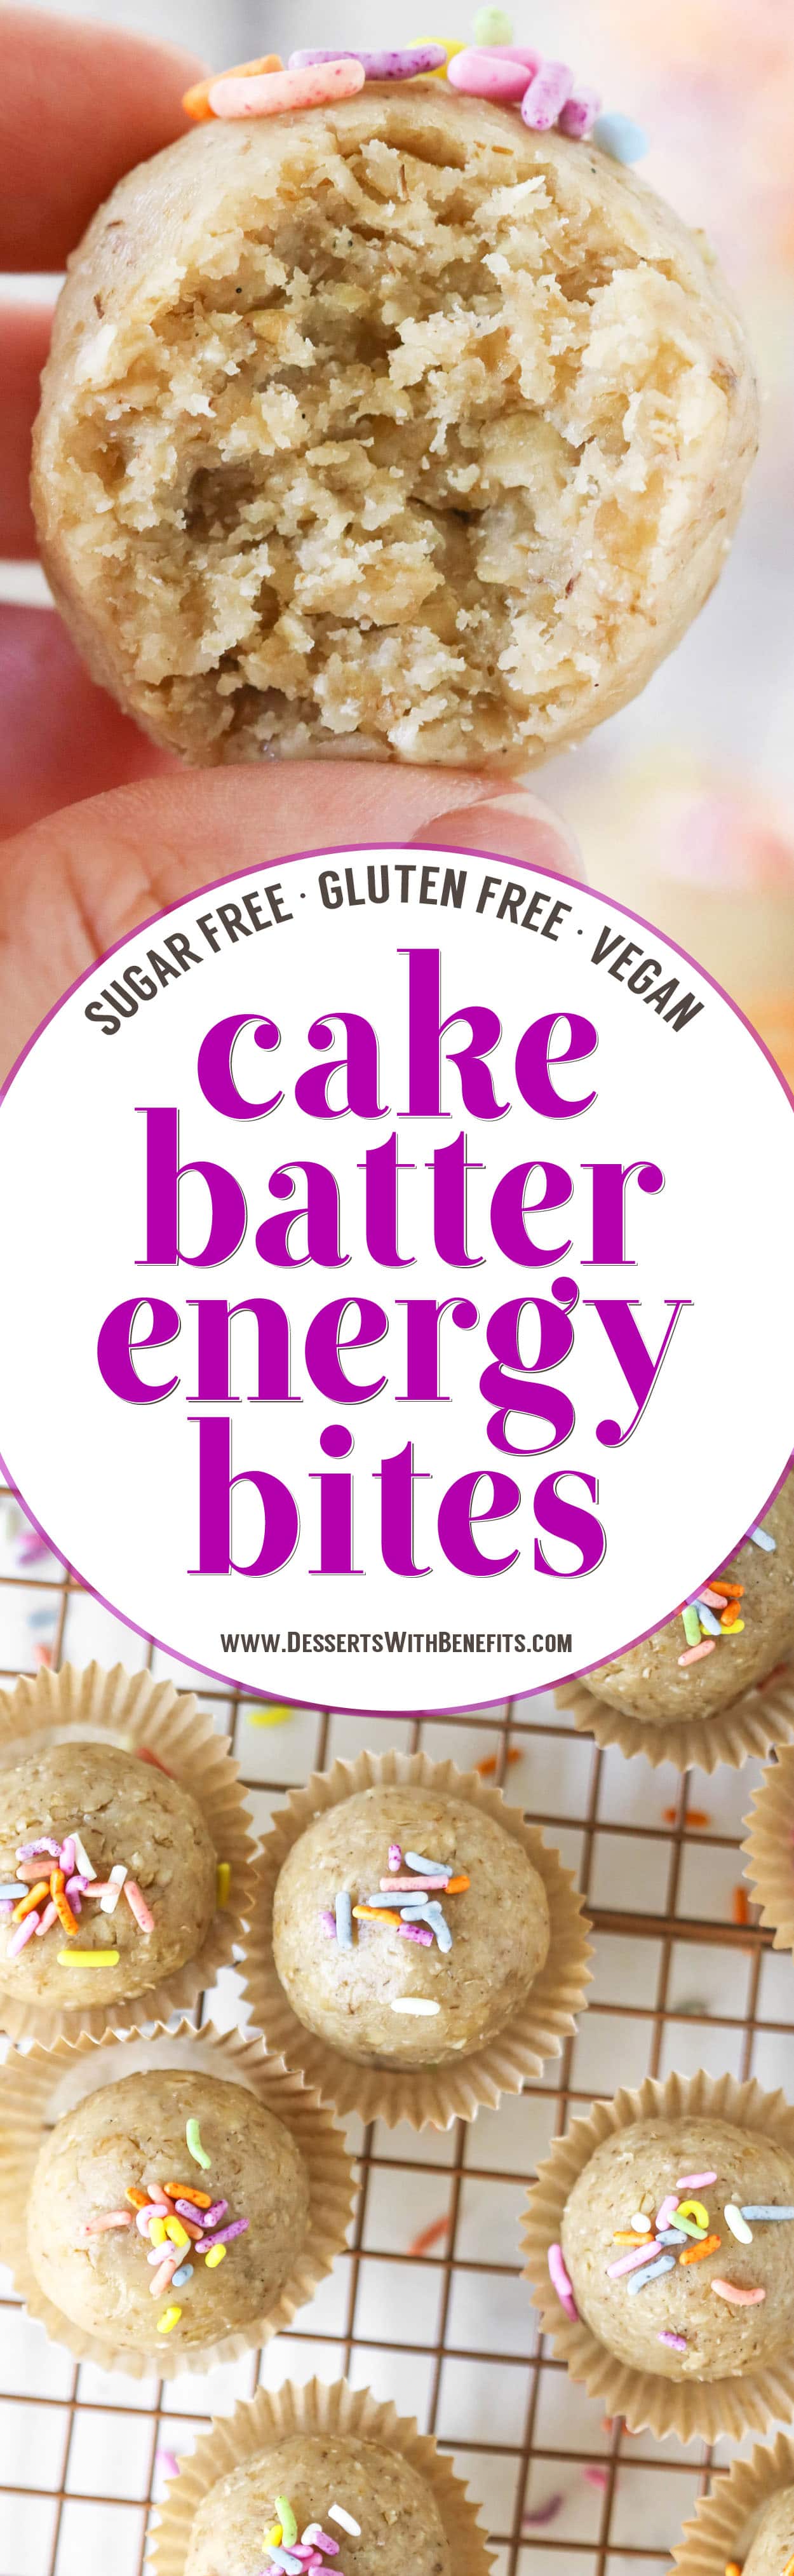 These 5-ingredient Cake Batter Energy Bites have got all the flavor of vanilla cake without the added sugar, butter, oil or eggs. Yep, these healthy no-bake energy bites are sugar free, gluten free, dairy free, and vegan.